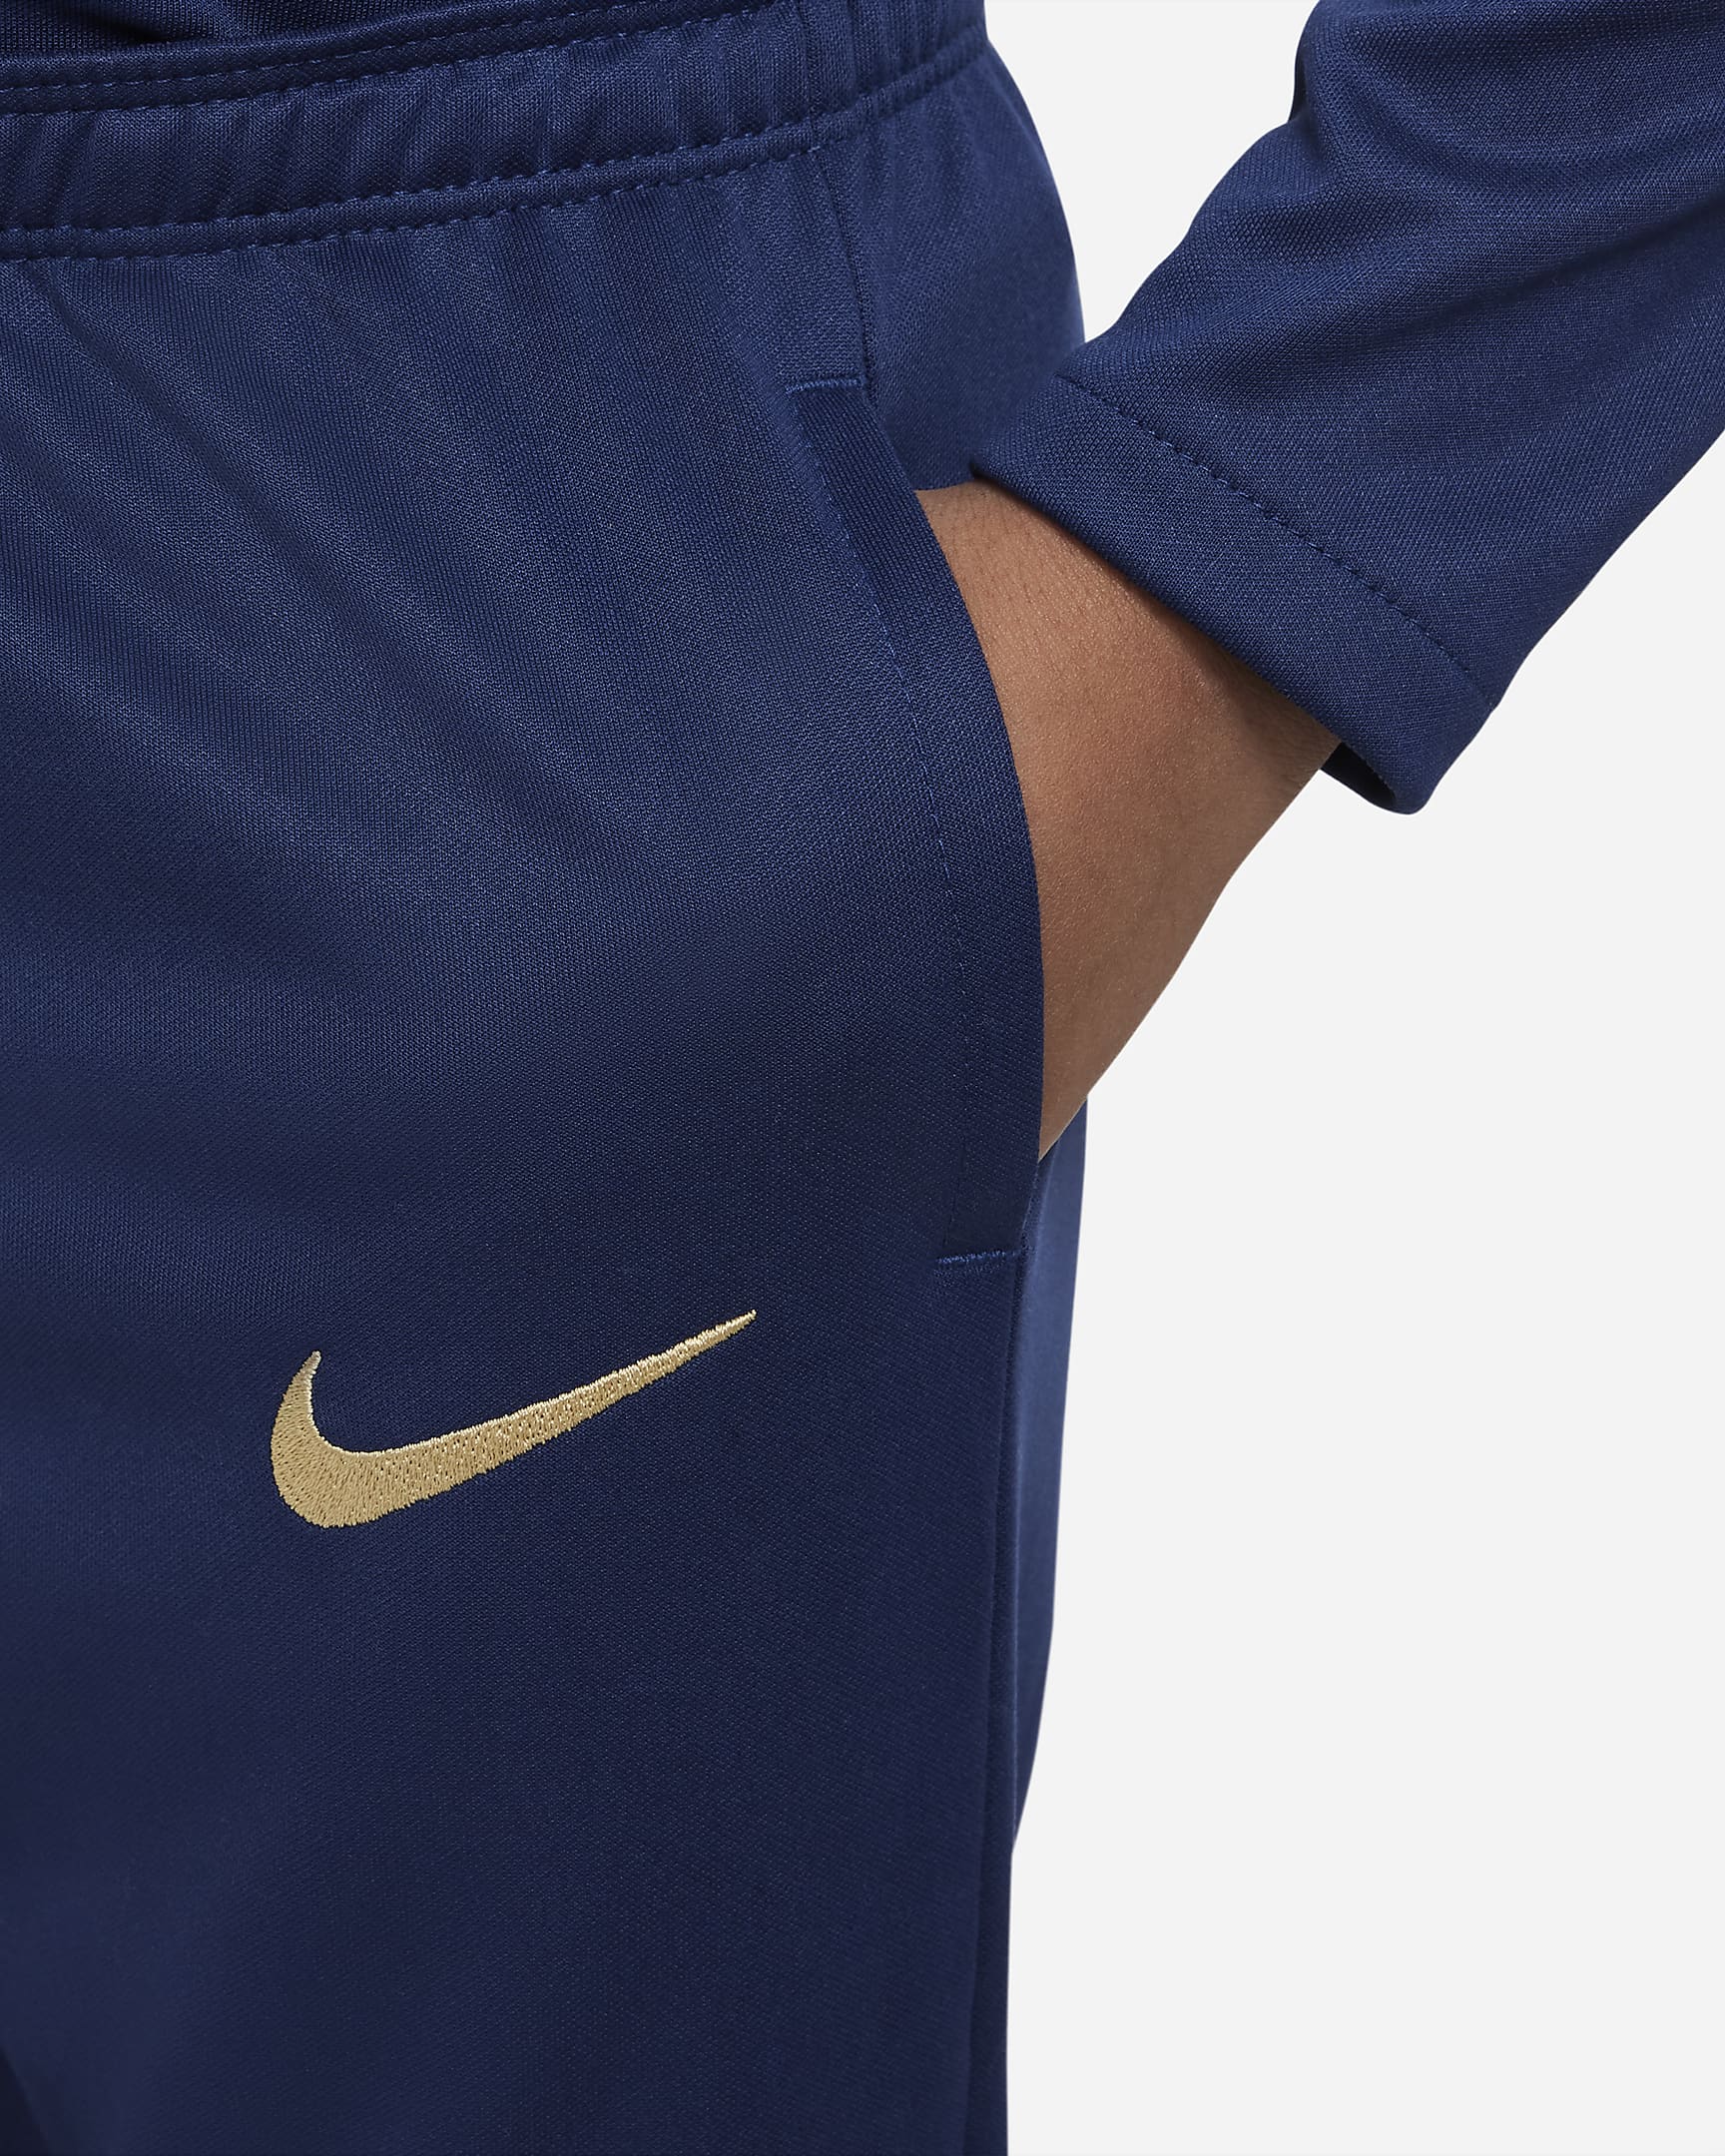 FFF Academy Pro Younger Kids' Nike Dri-FIT Football Pants. Nike SK